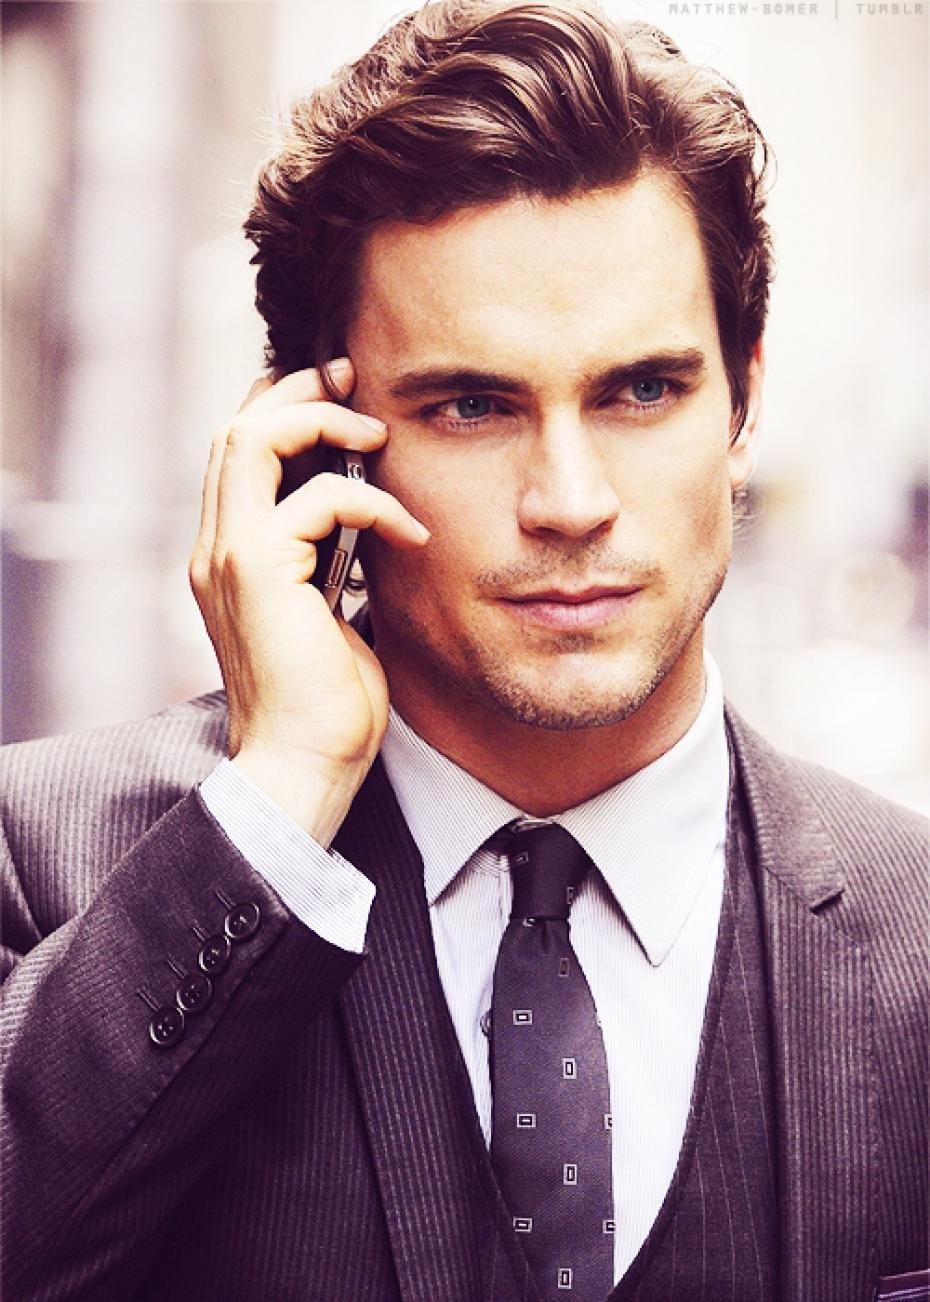 The 46-year old son of father John Bomer and mother Sissi Bomer Matt Bomer in 2024 photo. Matt Bomer earned a 0.125 million dollar salary - leaving the net worth at 7 million in 2024